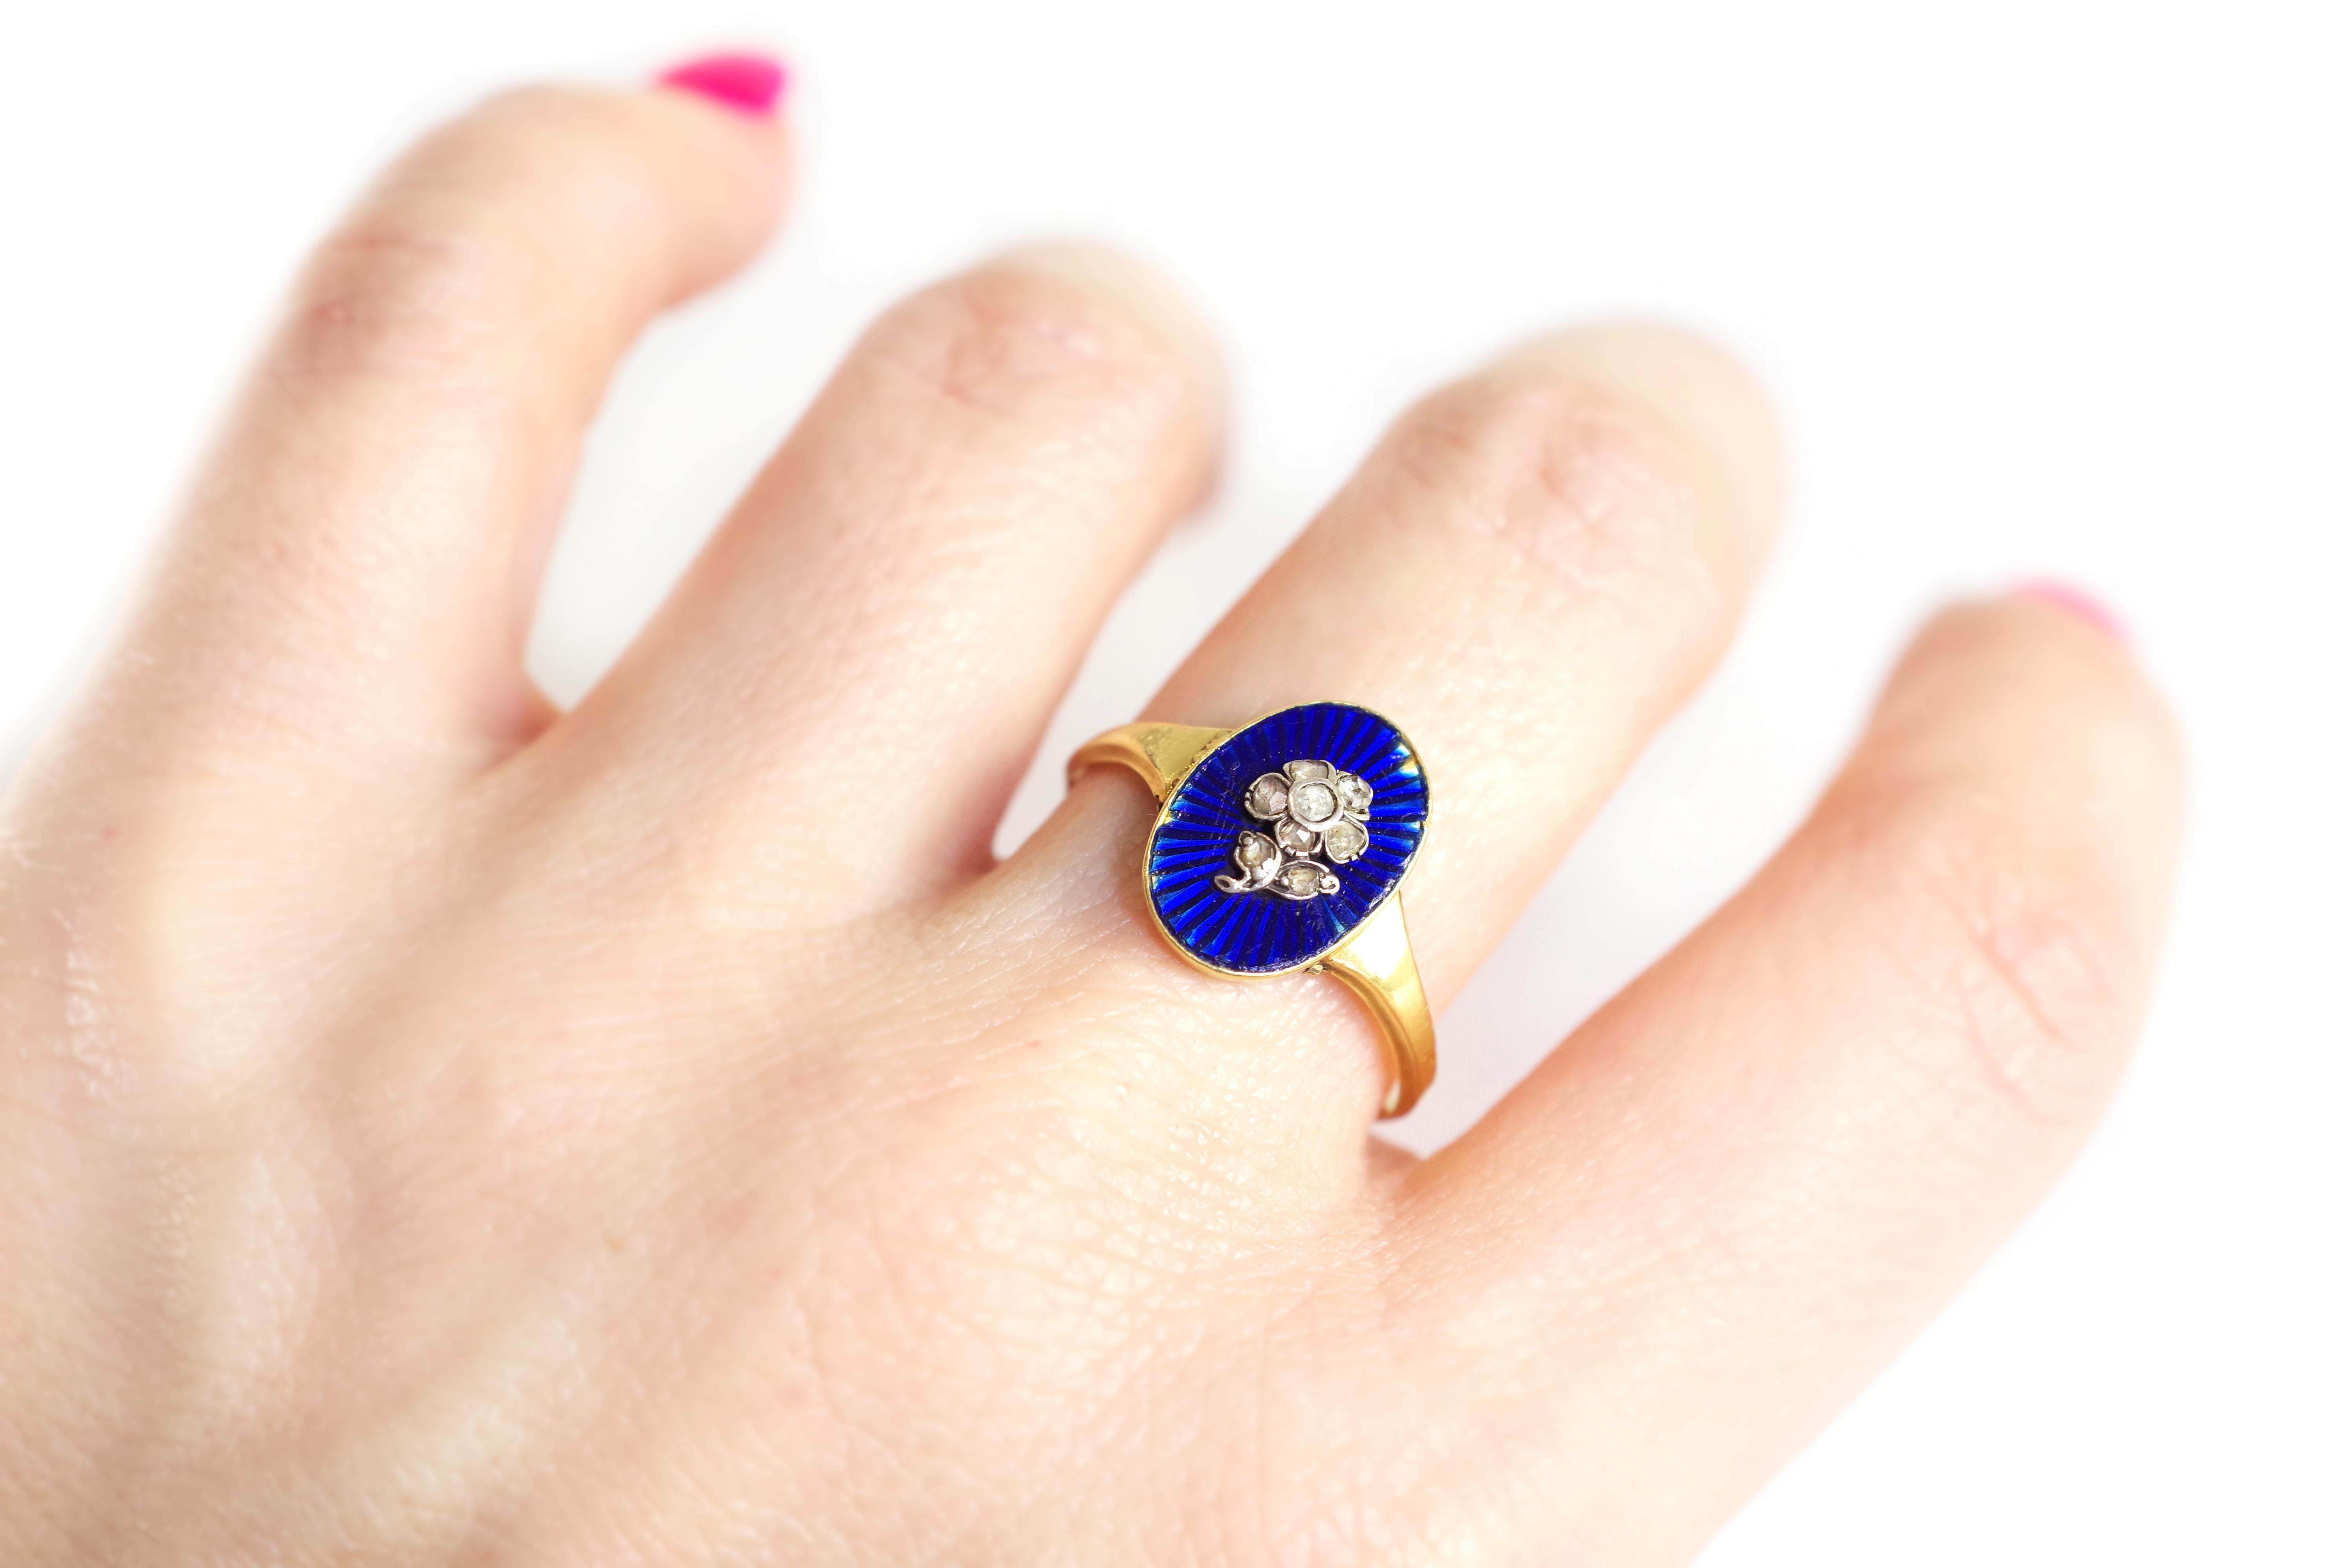 Flower enamel secret locket ring in 18 karat yellow gold. Antique ring with an oval bezel in blue enamelled guilloché on which is applied a silver flower set with eight rose-cut diamonds. A secret compartment is hidden under the bezel, allowing to